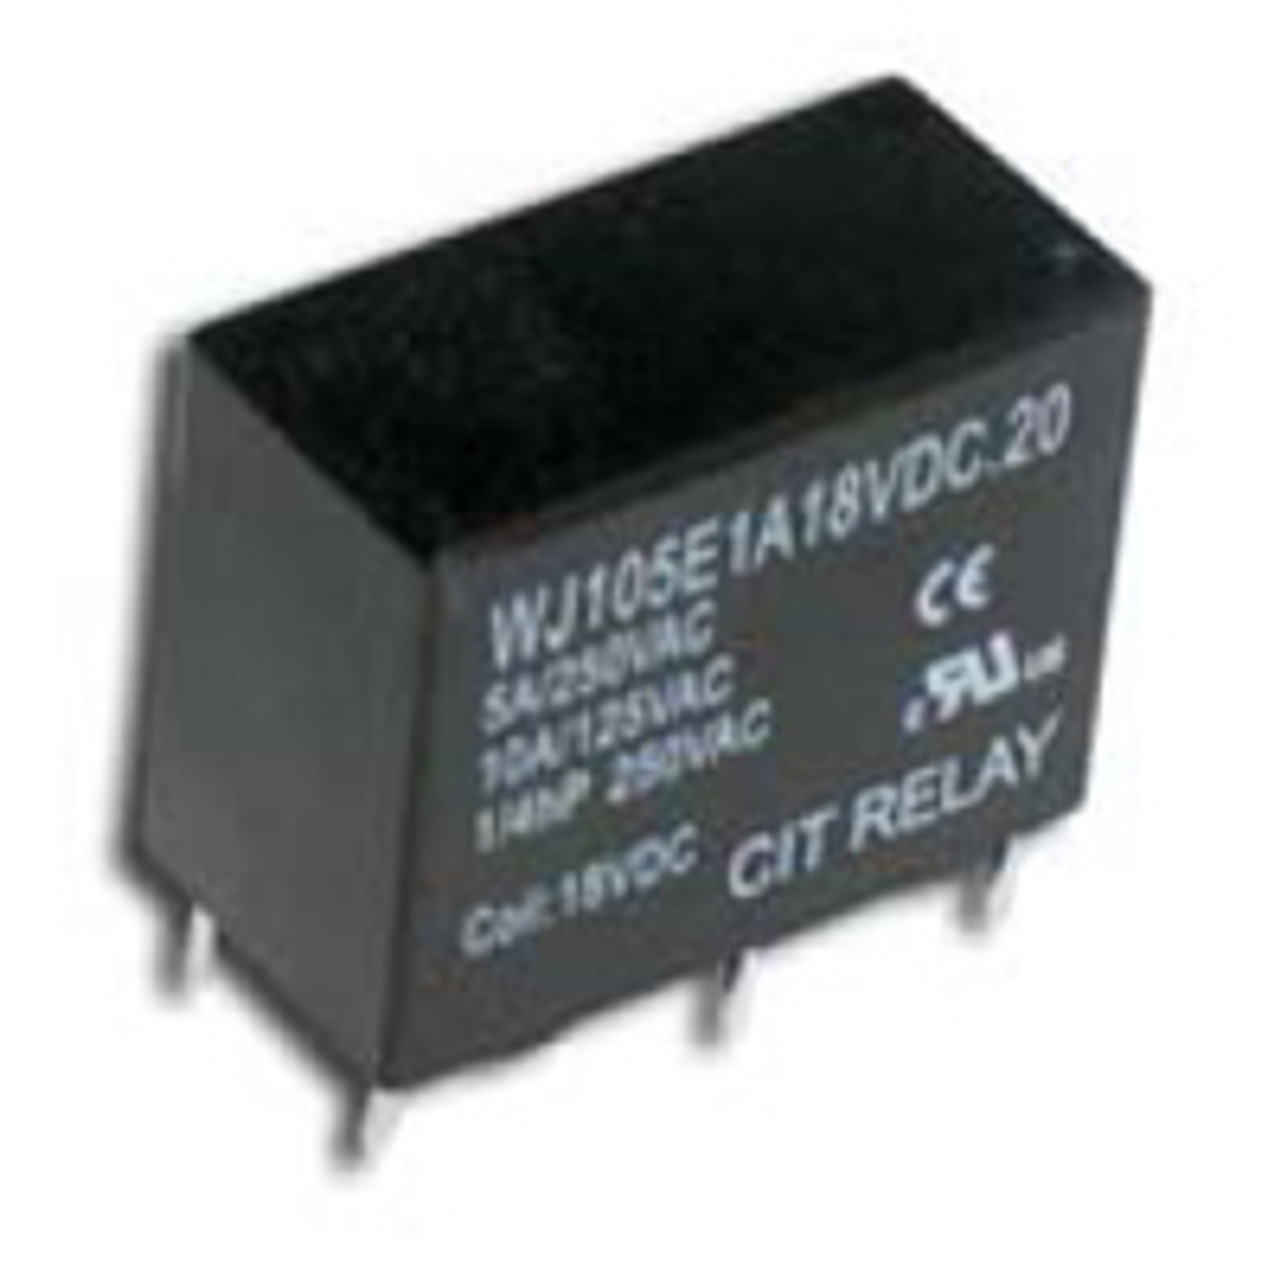 CIT Relay and Switch J105E1A48VDC.45 General Purpose Relays